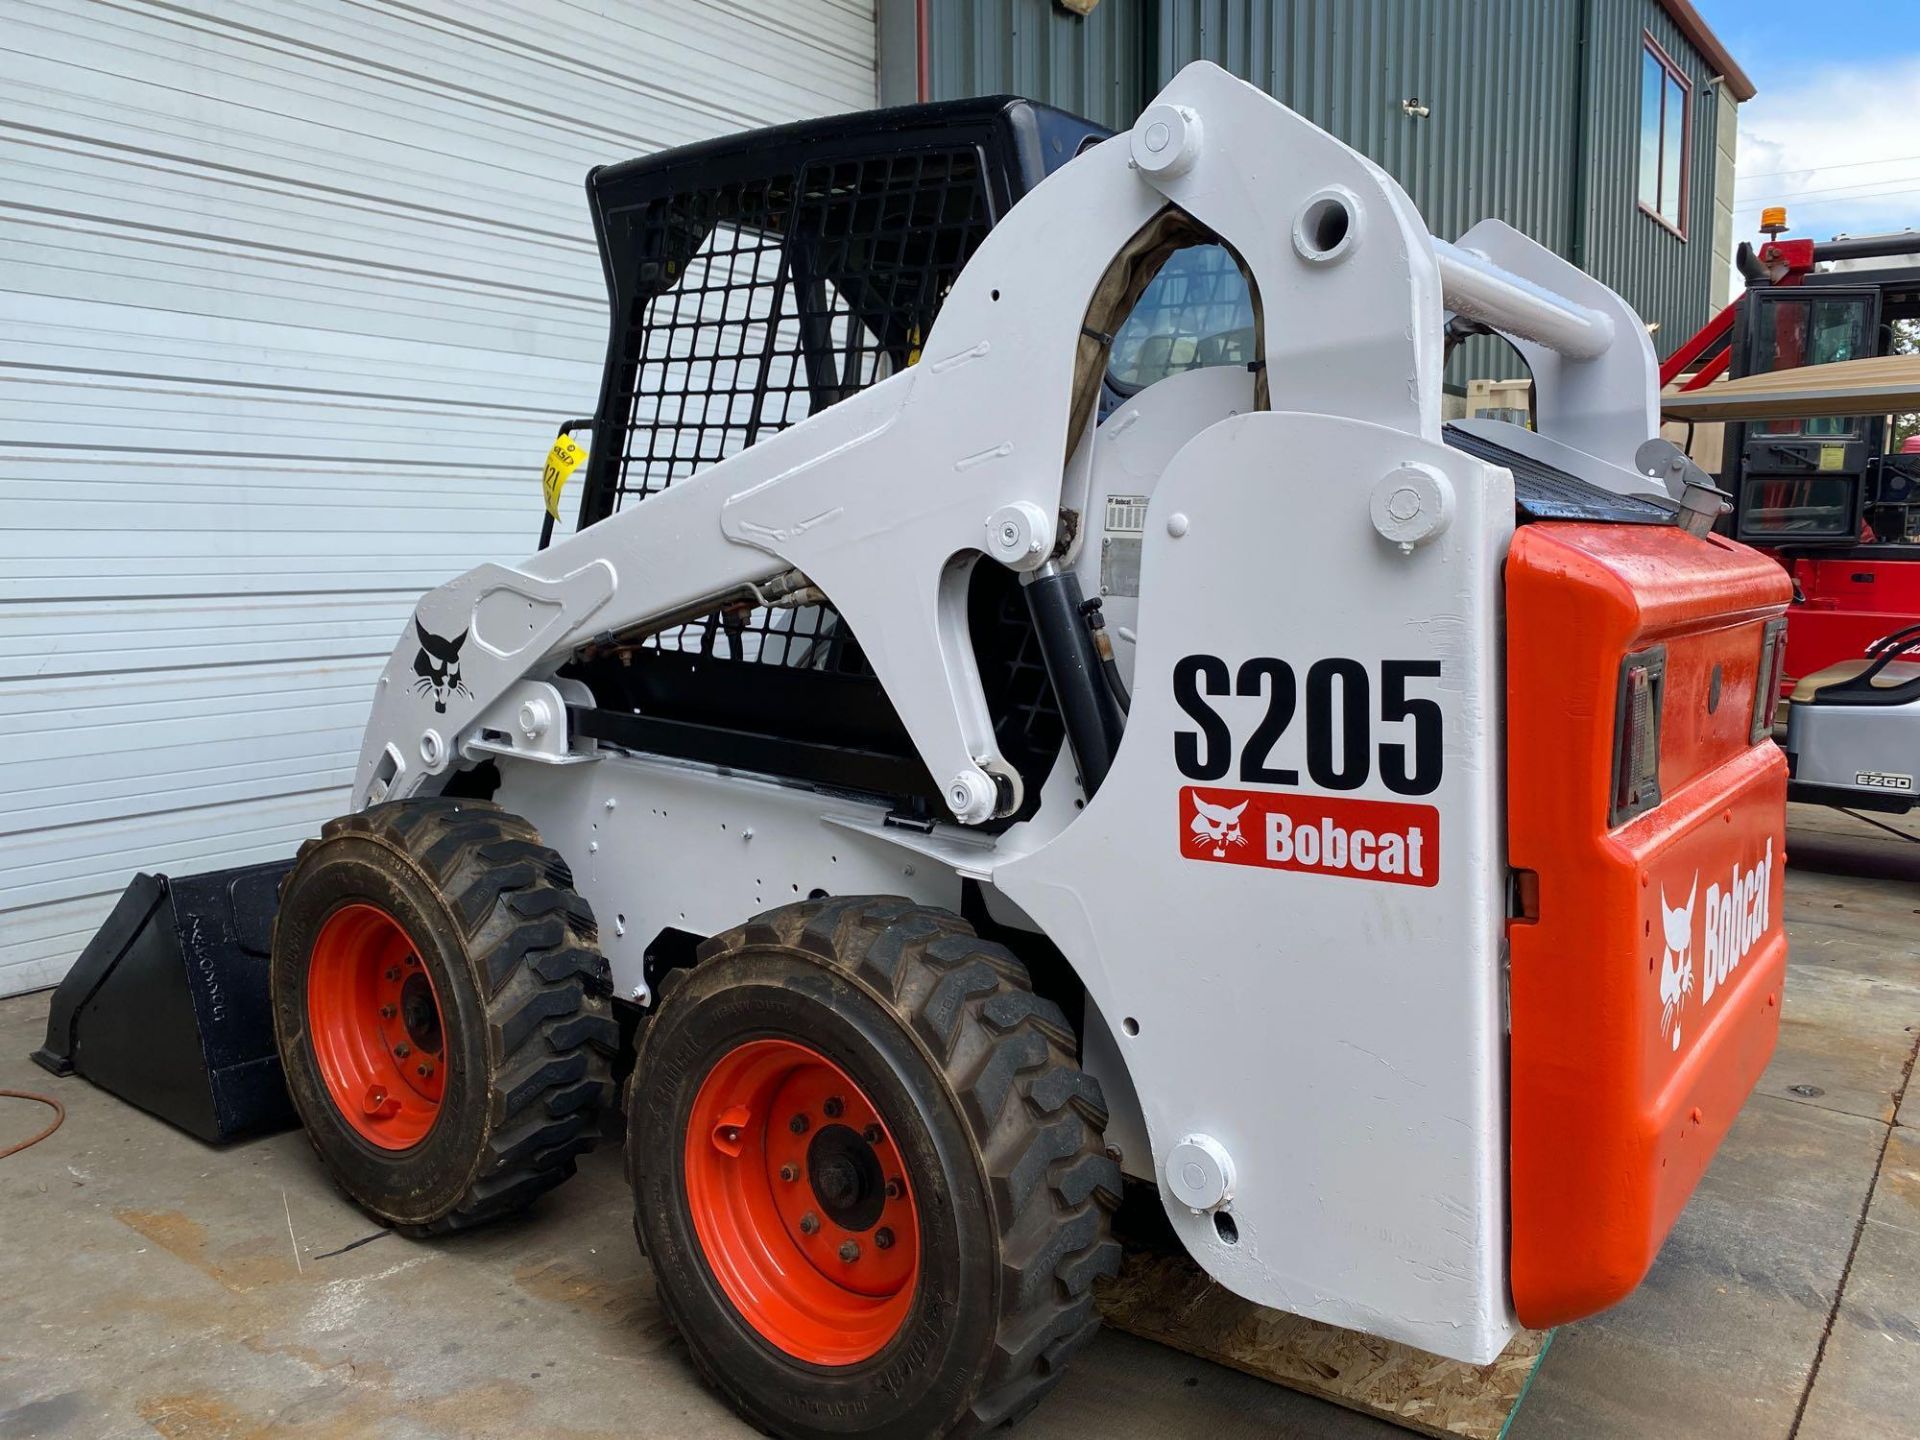 BOBCAT S205 DIESEL SKID STEER WITH BUCKET ATTACHMENT, RUNS & OPERATES - Image 2 of 7